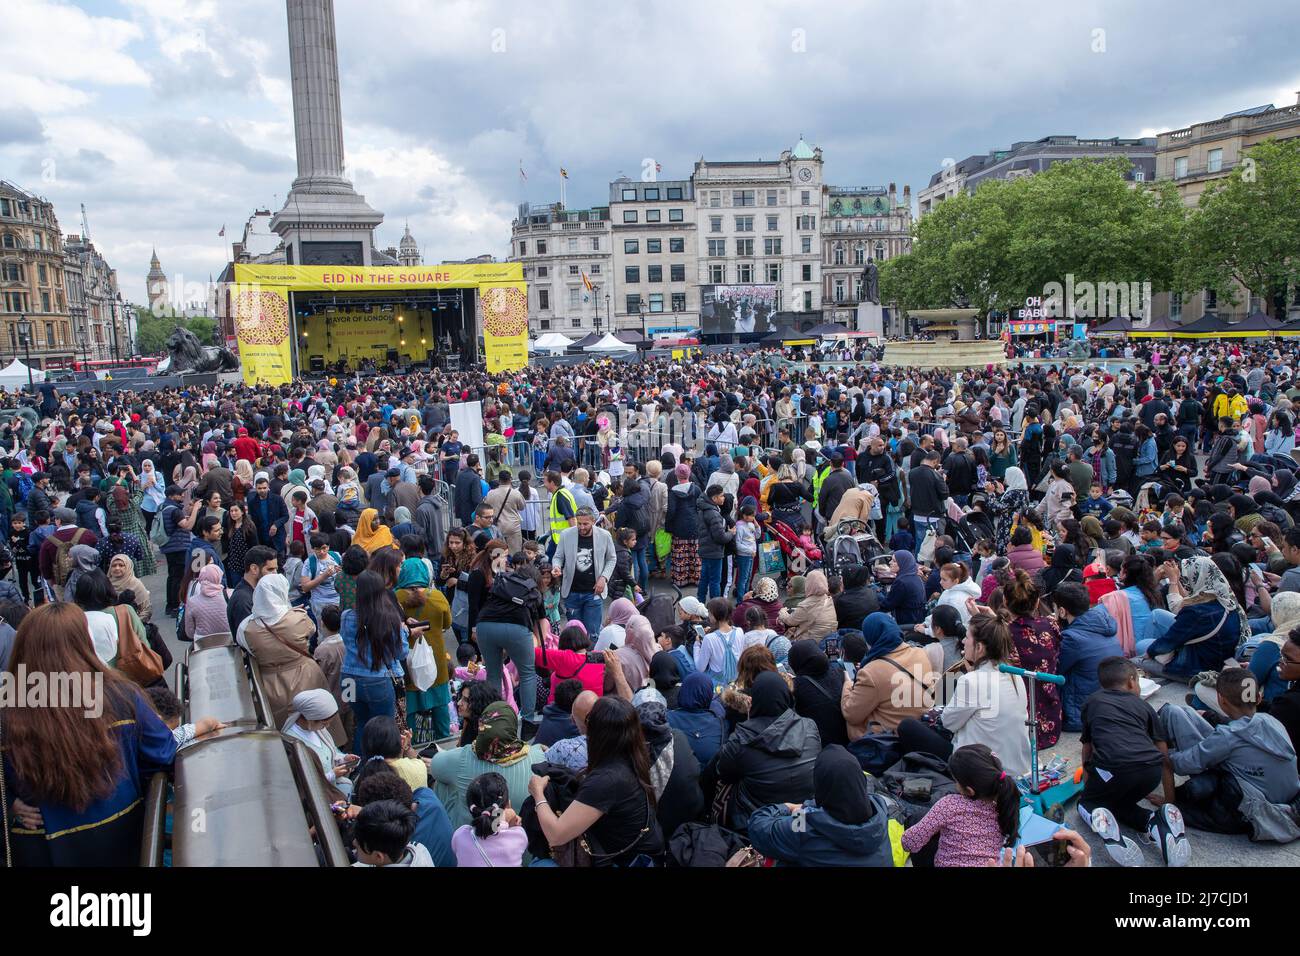 LONDON, MAY 08 2022. Thousands attend Eid In The Square on Trafalgar Square to mark the end of Ramadan, the holy month of fasting. Stock Photo